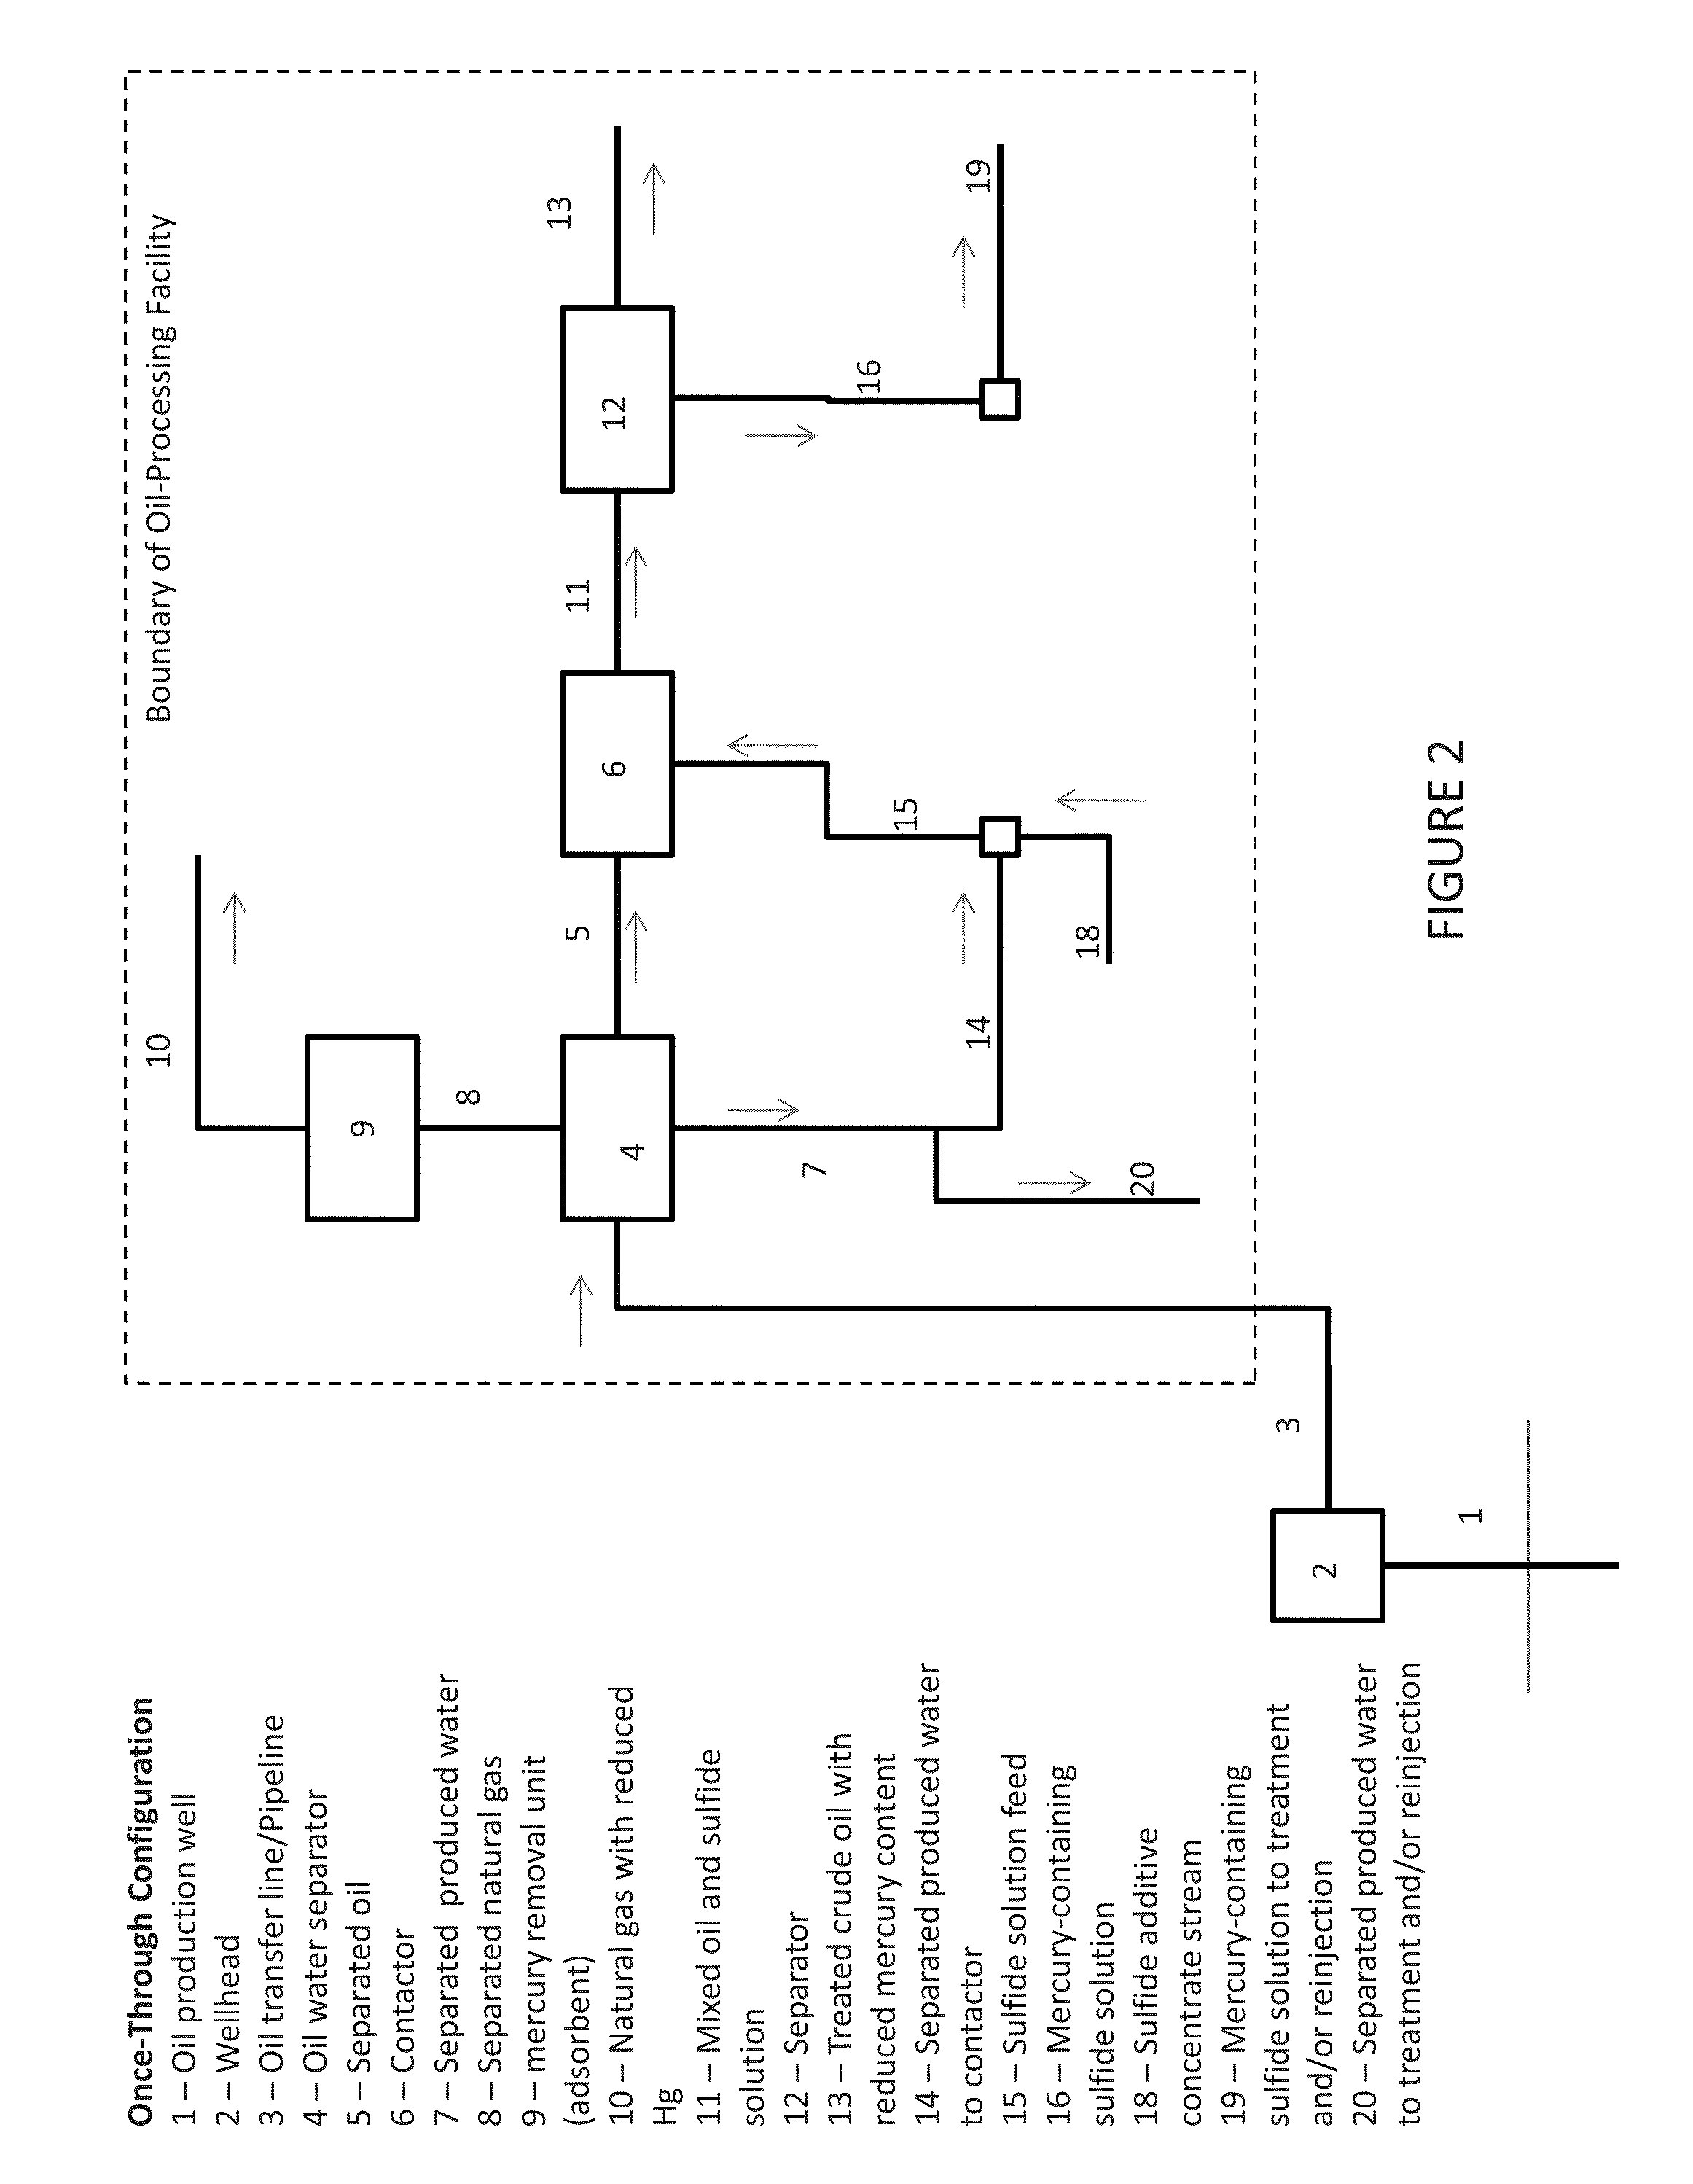 Process, method, and system for removing mercury from fluids